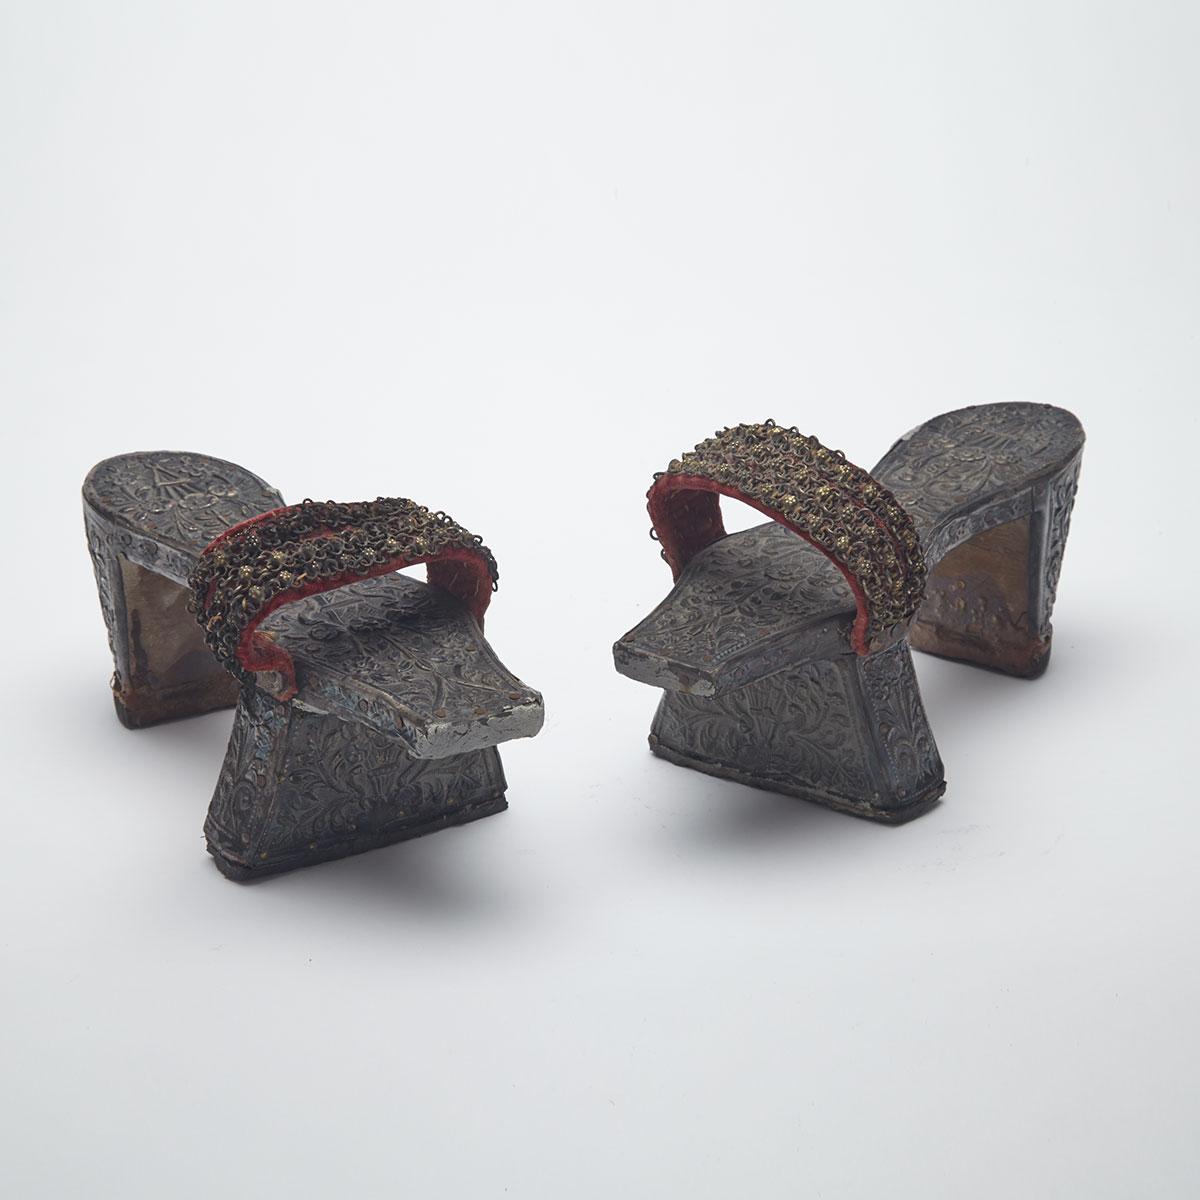 Pair of Silvered Shoes, Ottoman, 19th Century